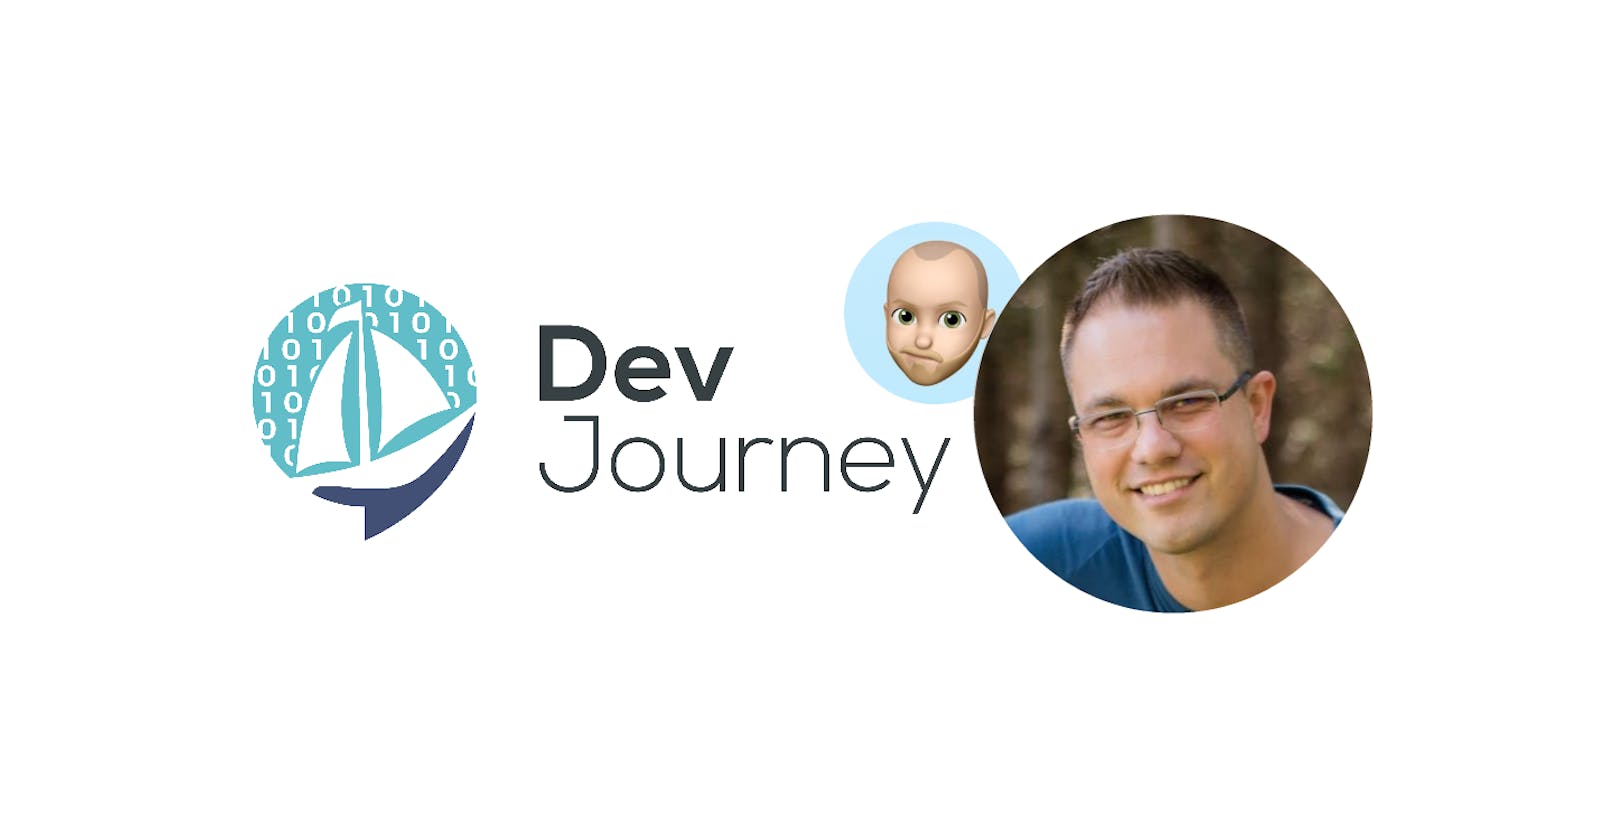 Jamon Holmgren made his own independent way... and other things I learned recording his DevJourney